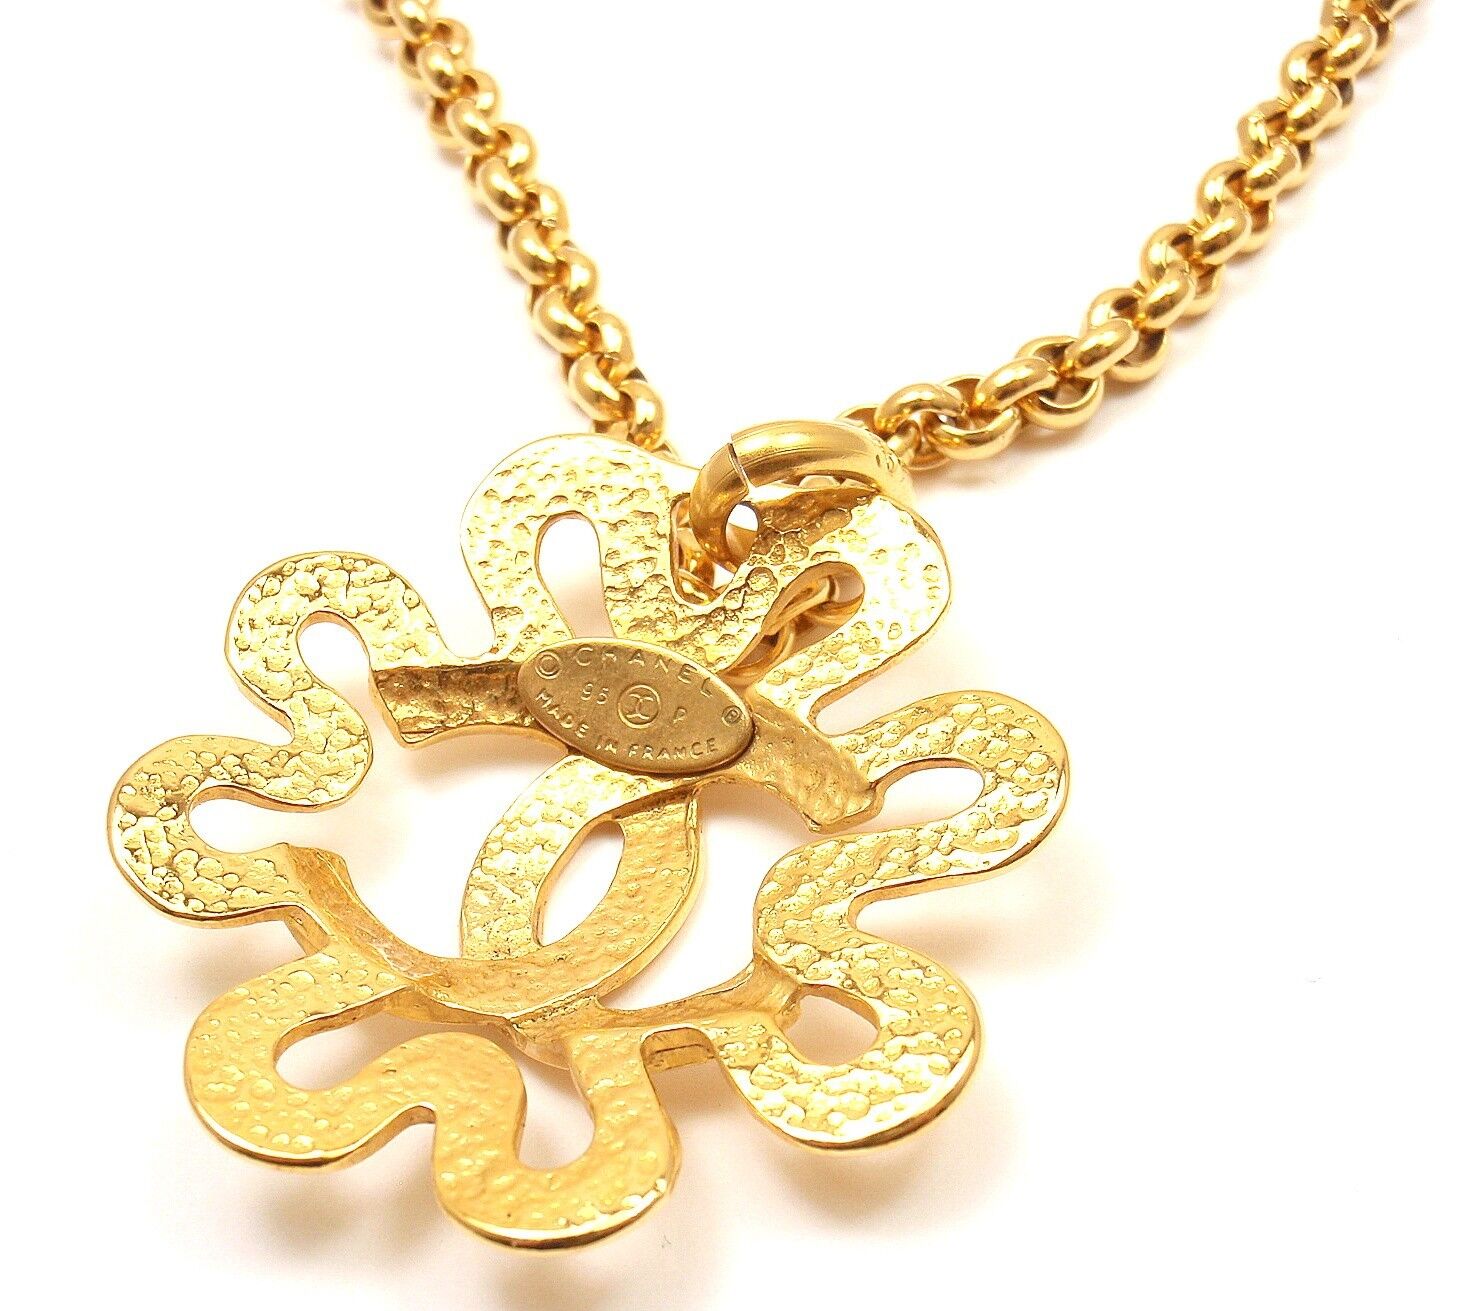 Chanel Resin Clover Pendant Necklace Yellow Gold Tone 25